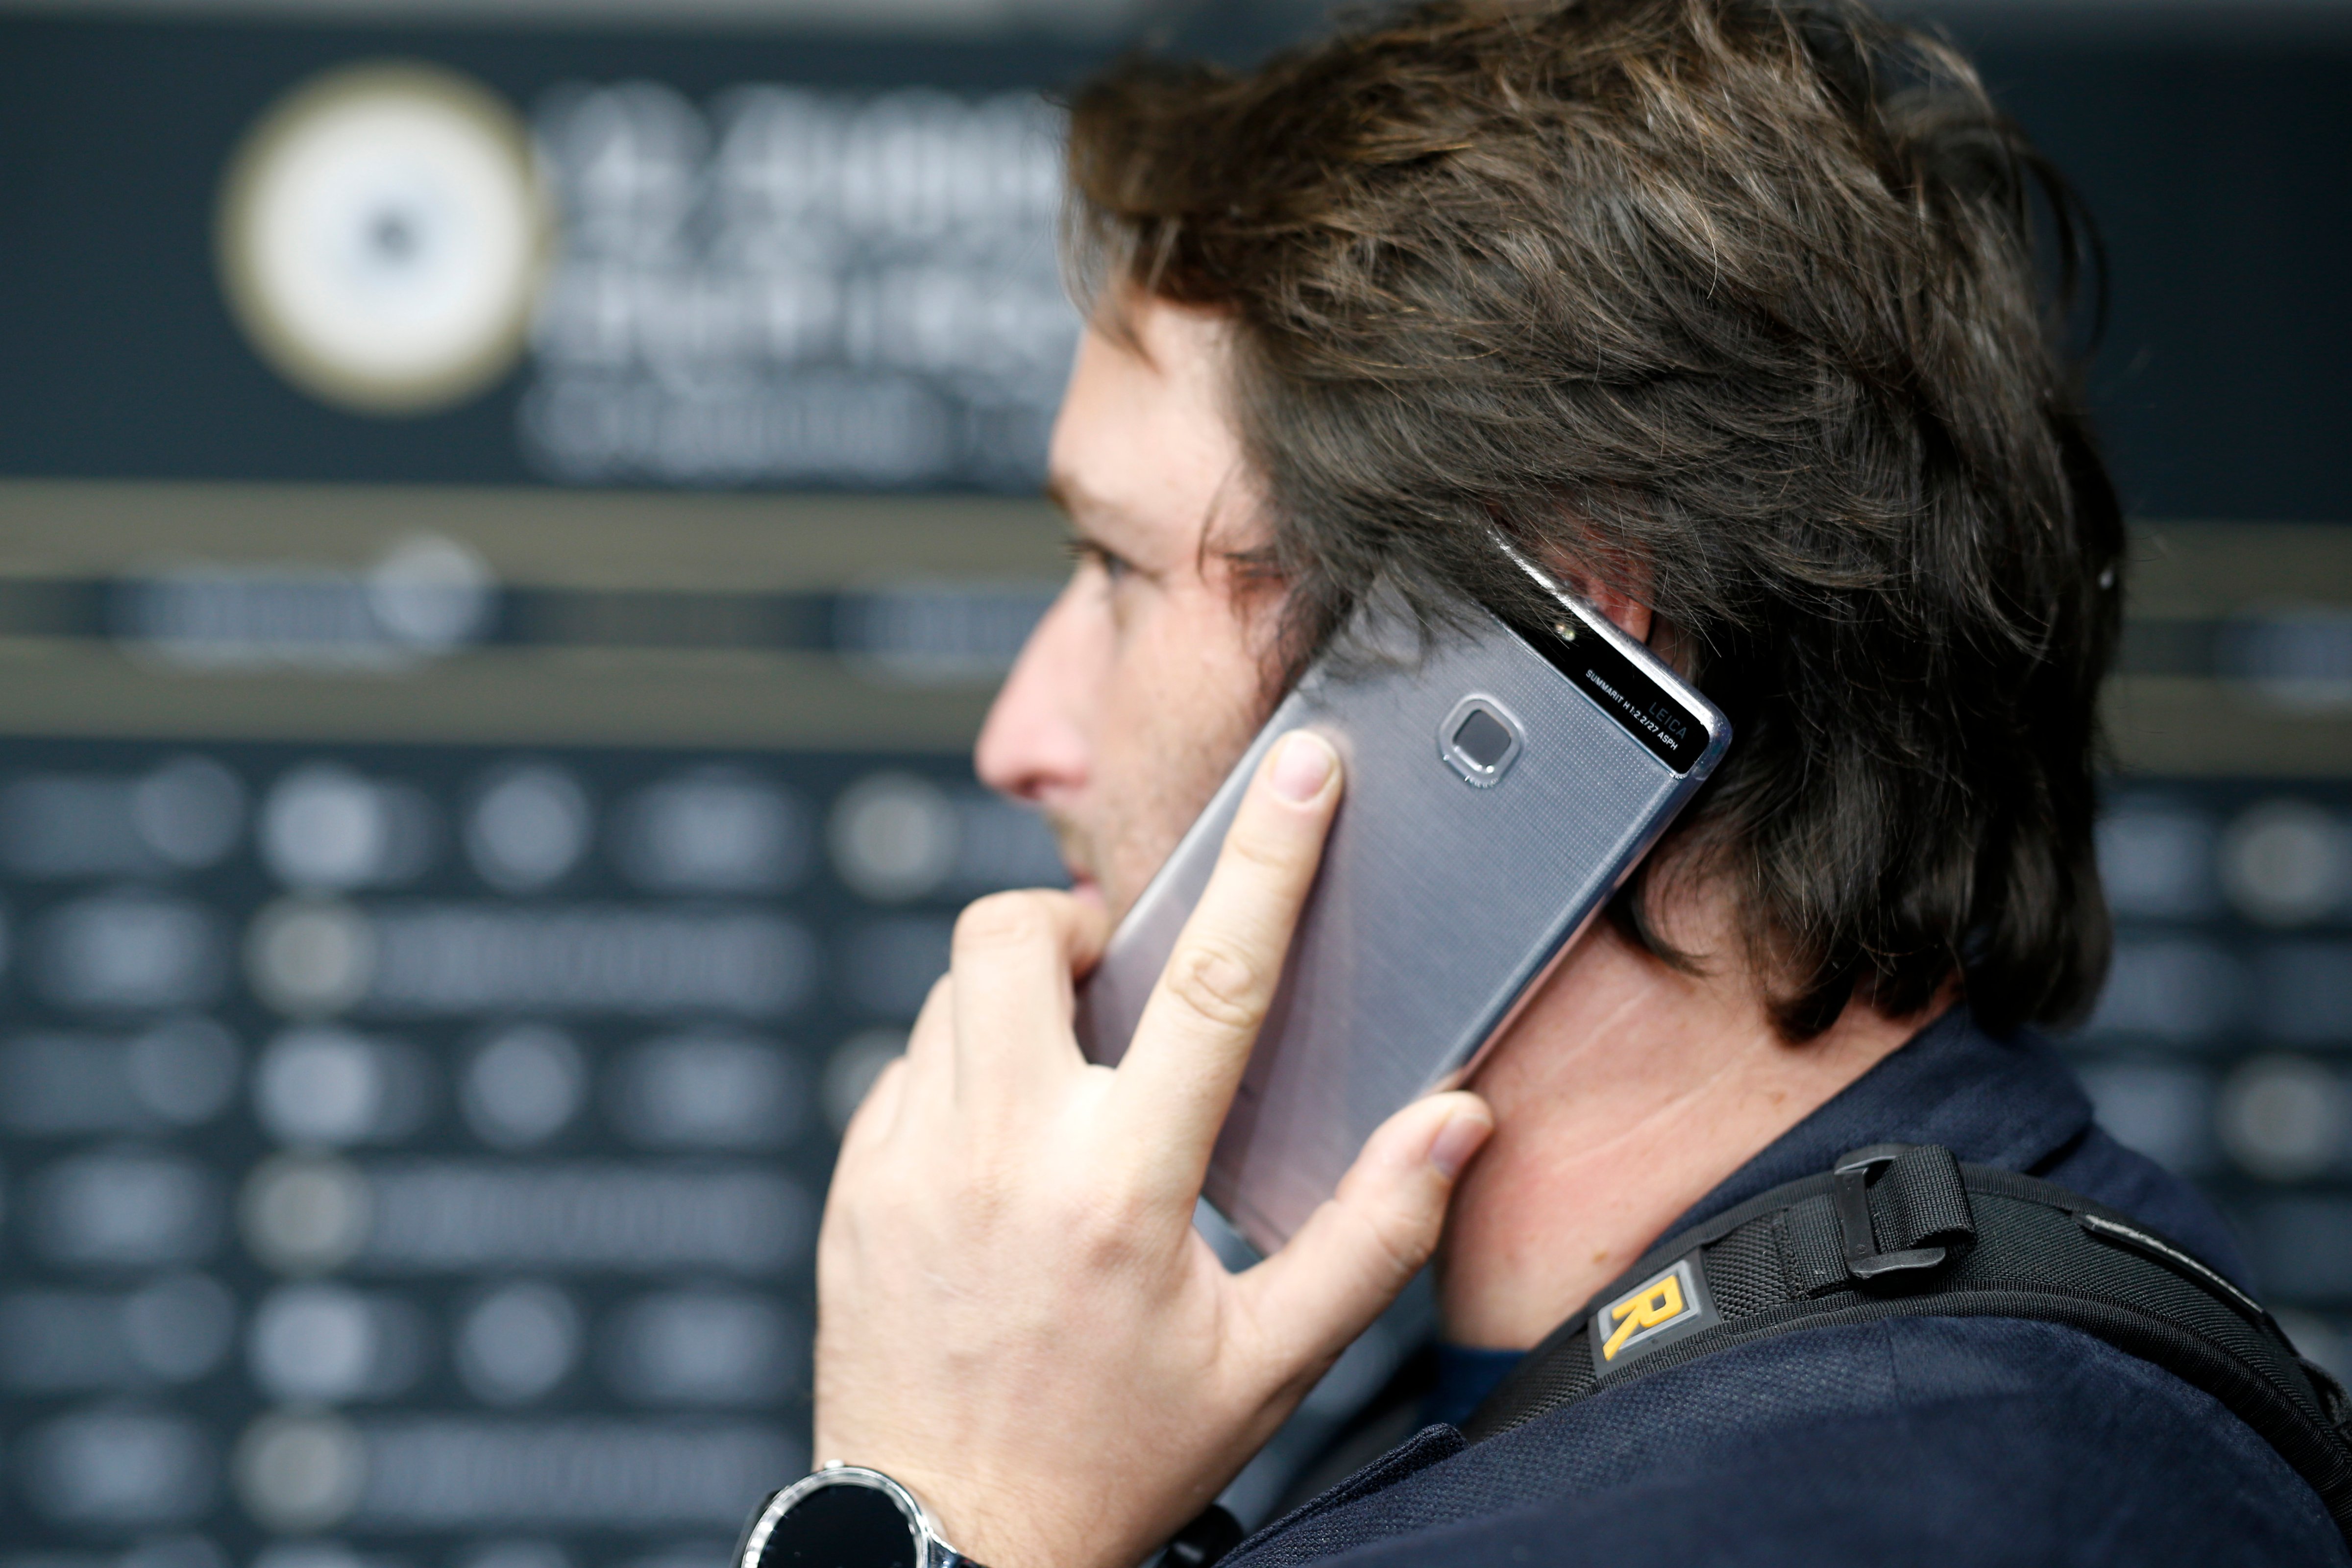 A visitor uses a Huawei phone during the 12th Zurich Film Festival on September 26, 2016 in Zurich, Switzerland. (Andreas Rentz—Getty Images)